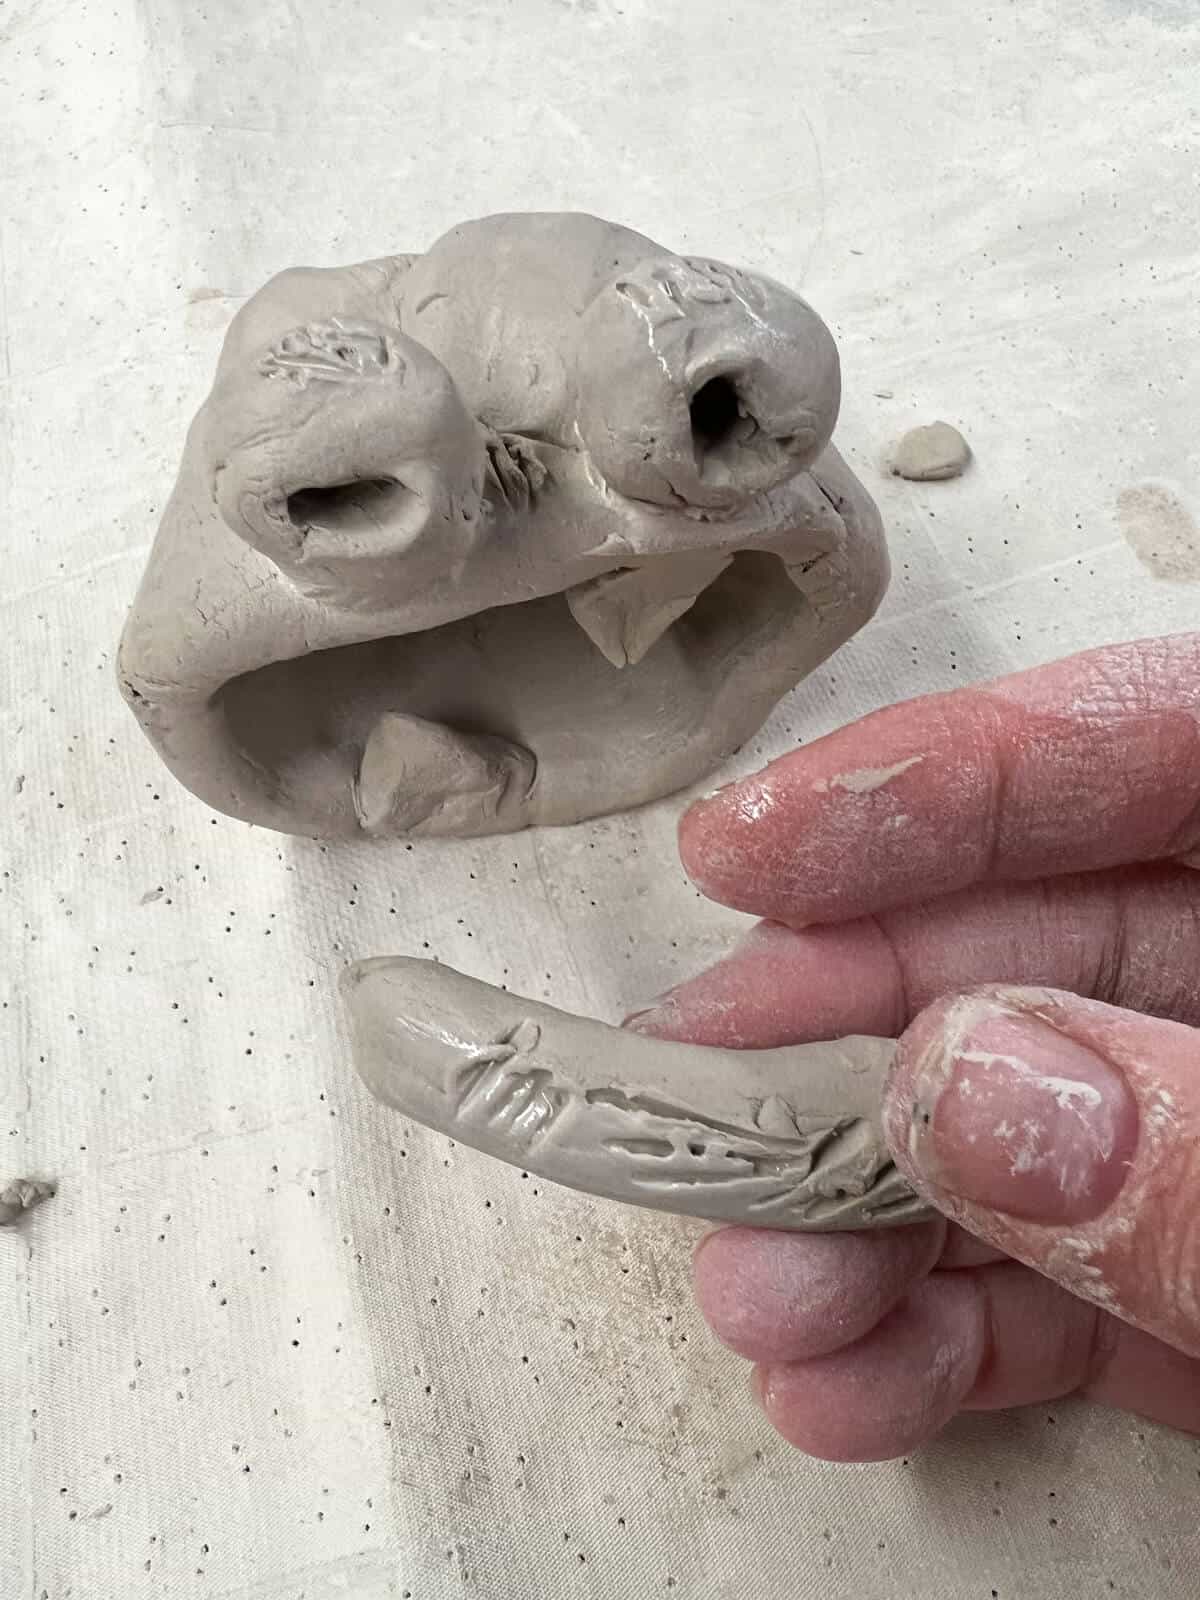 eyebrow for clay monster scored on to clay project.